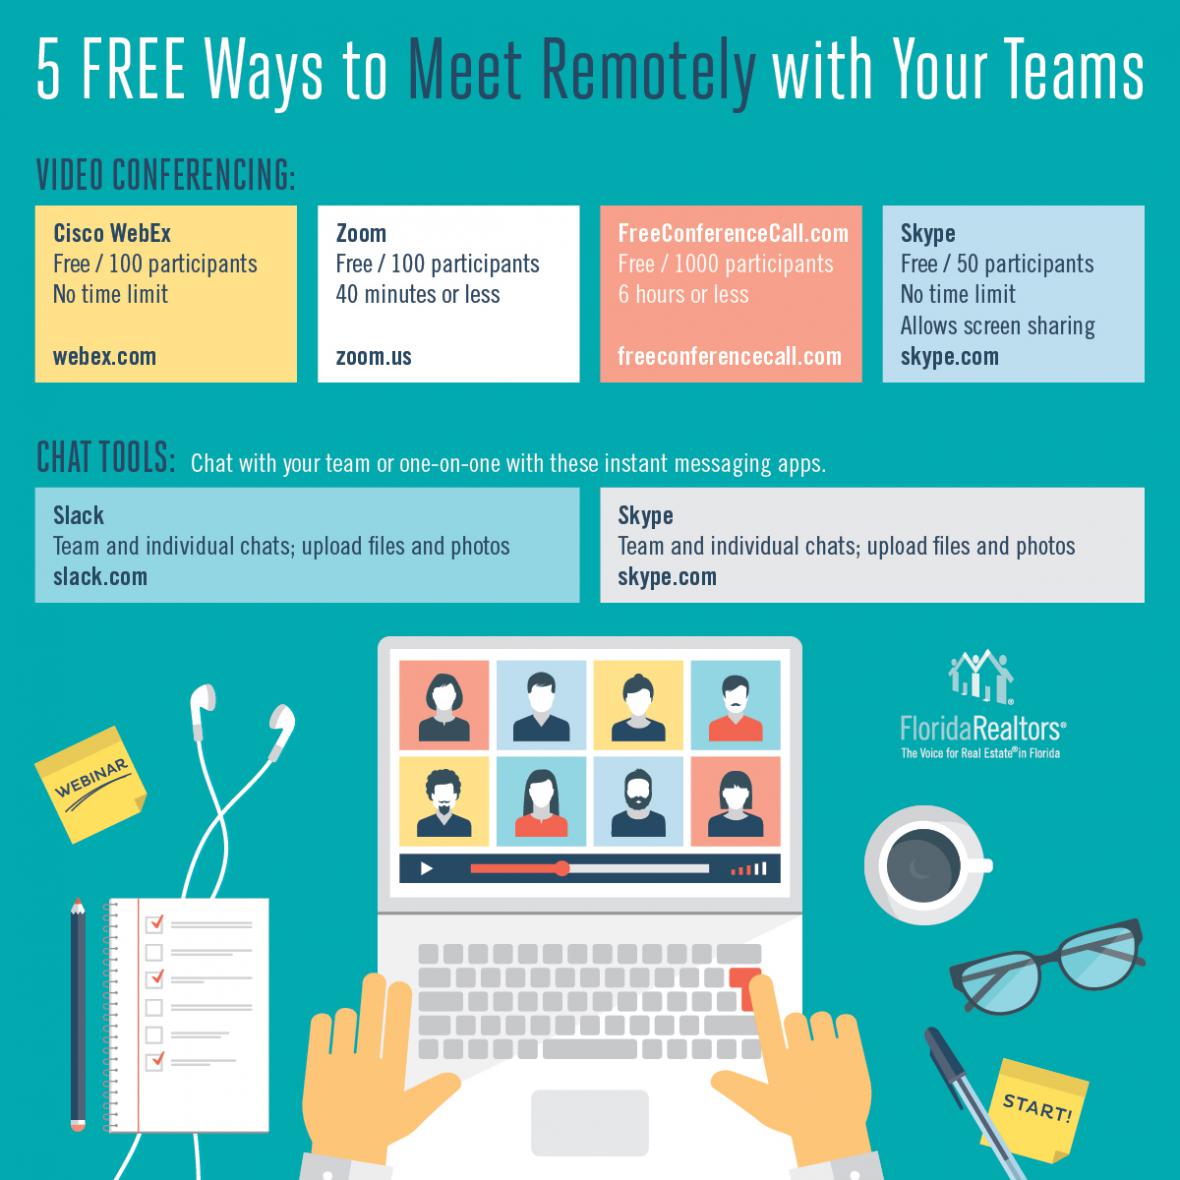 5 Free Ways to Meet Remotely with Your Teams